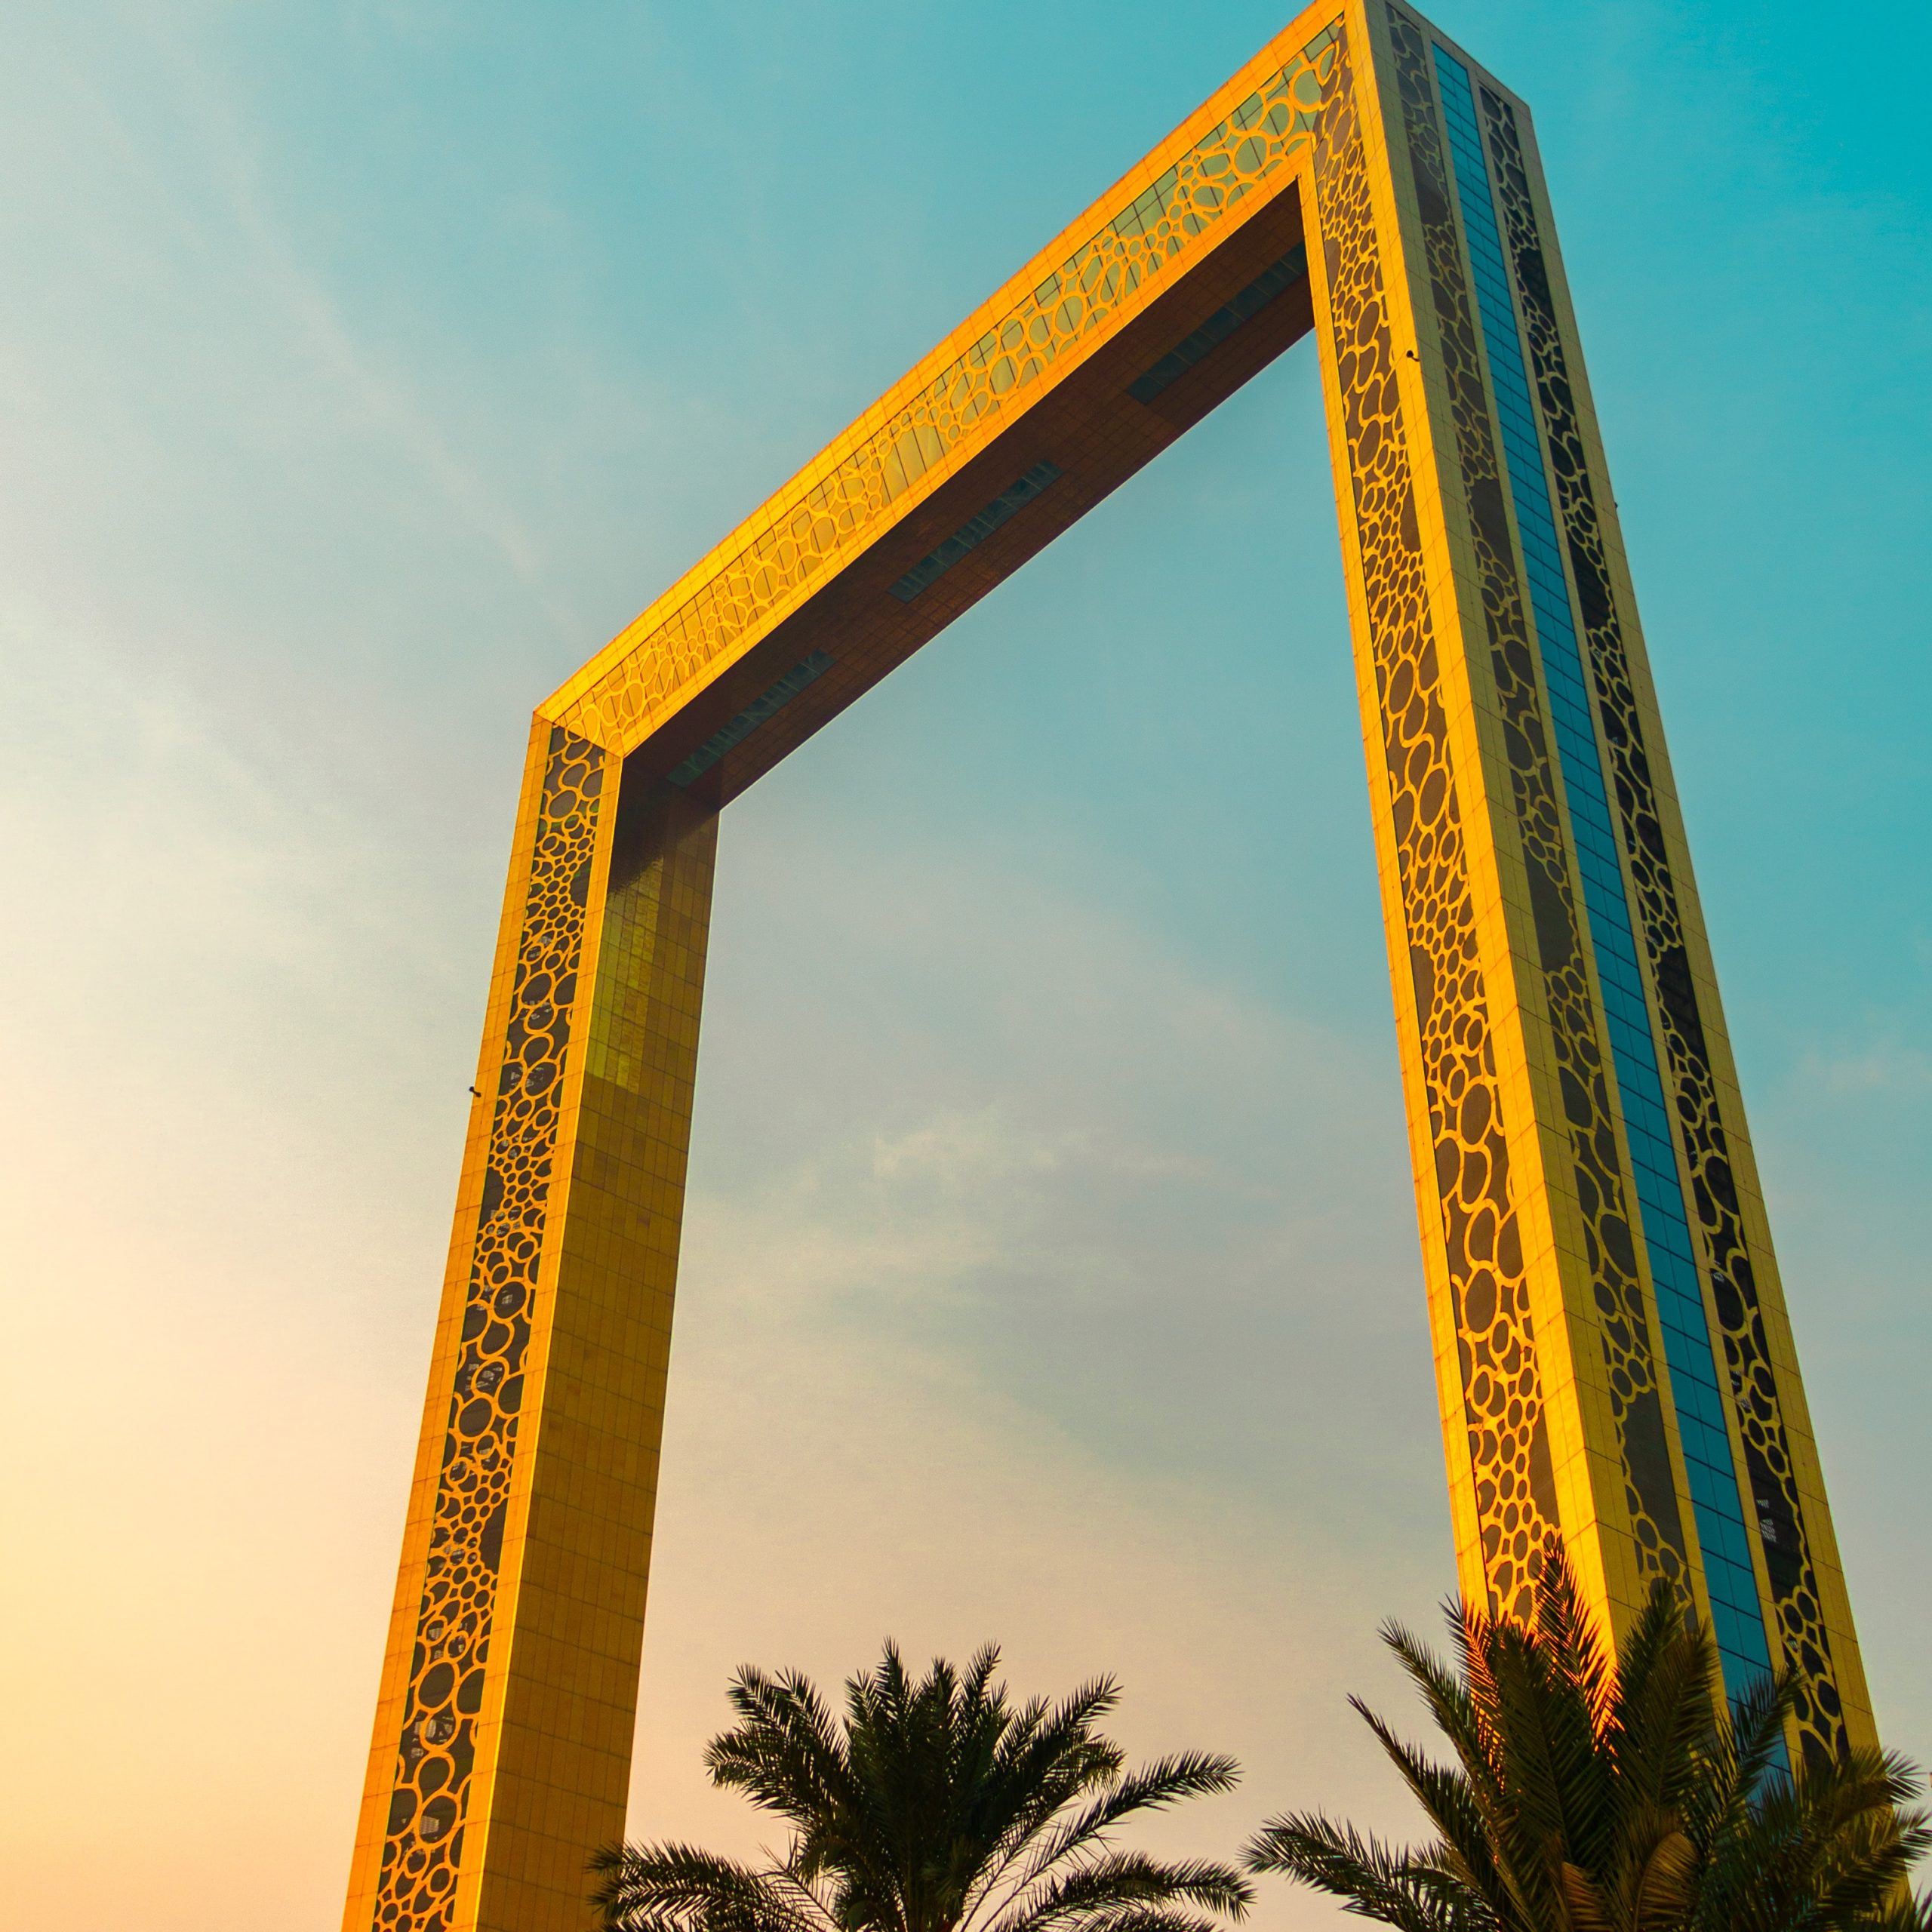 Combo: Dubai Frame + View at the Palm Tickets